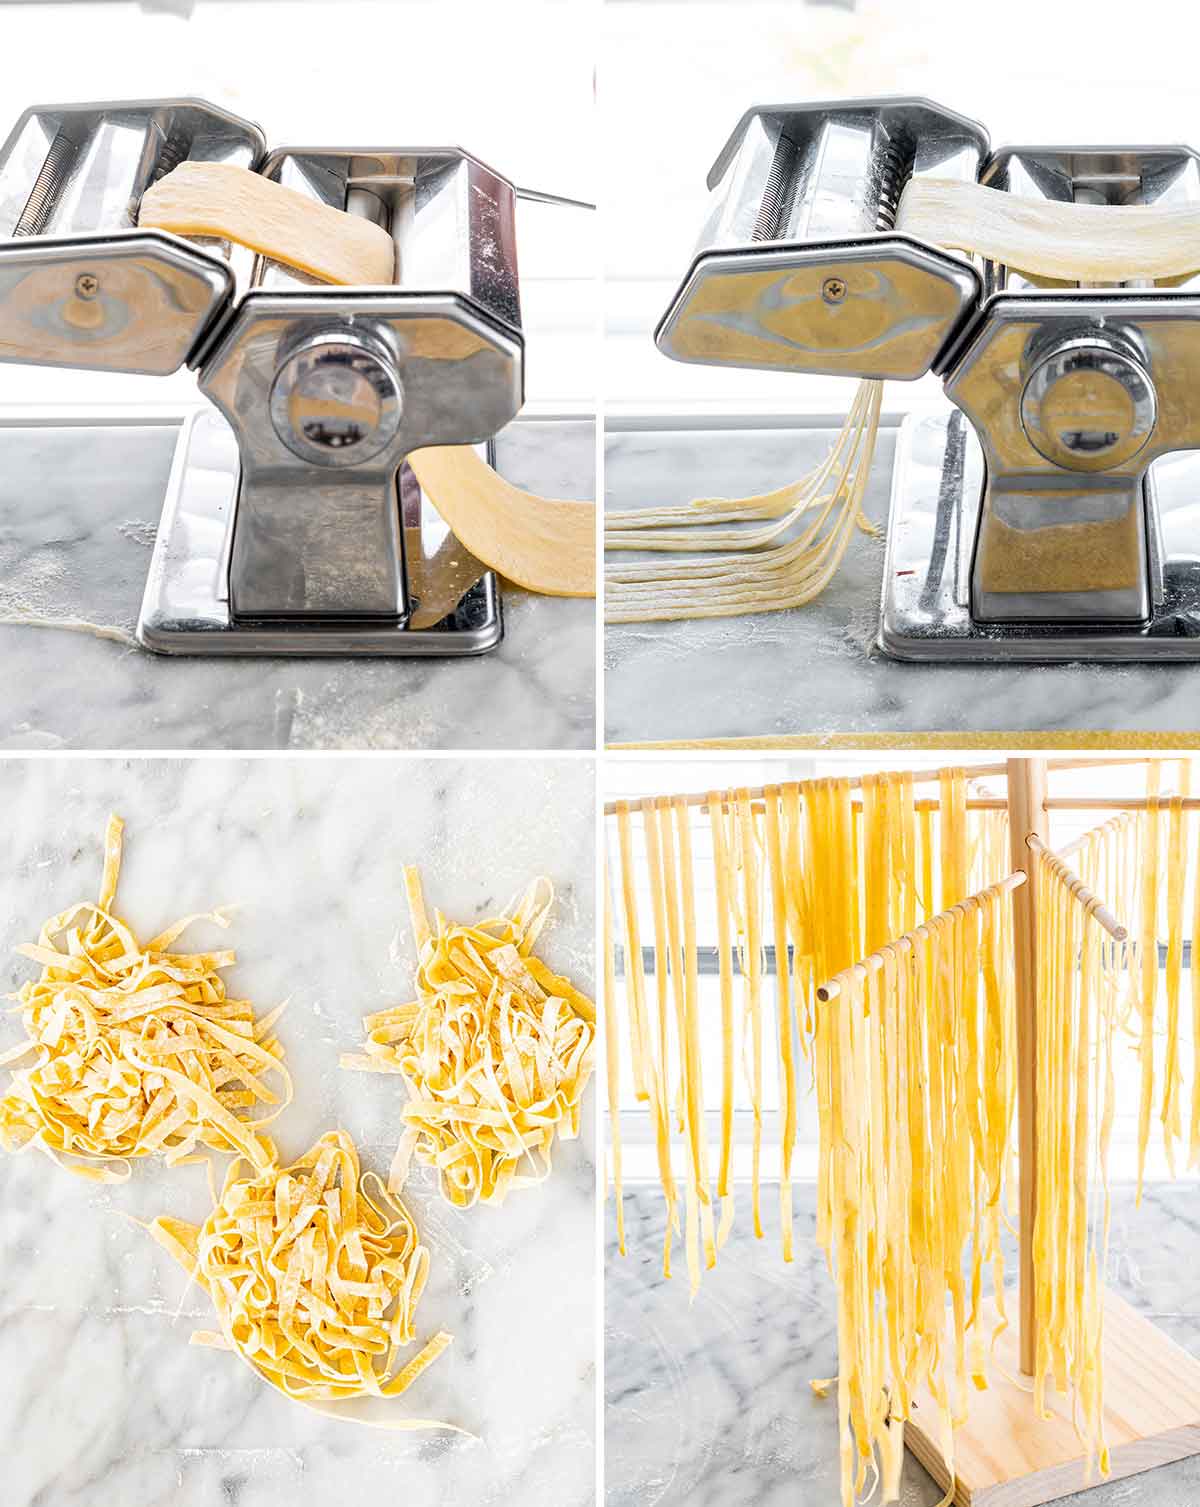 process shots showing how to roll out dough using a pasta machine and how to dry it on a drying rack